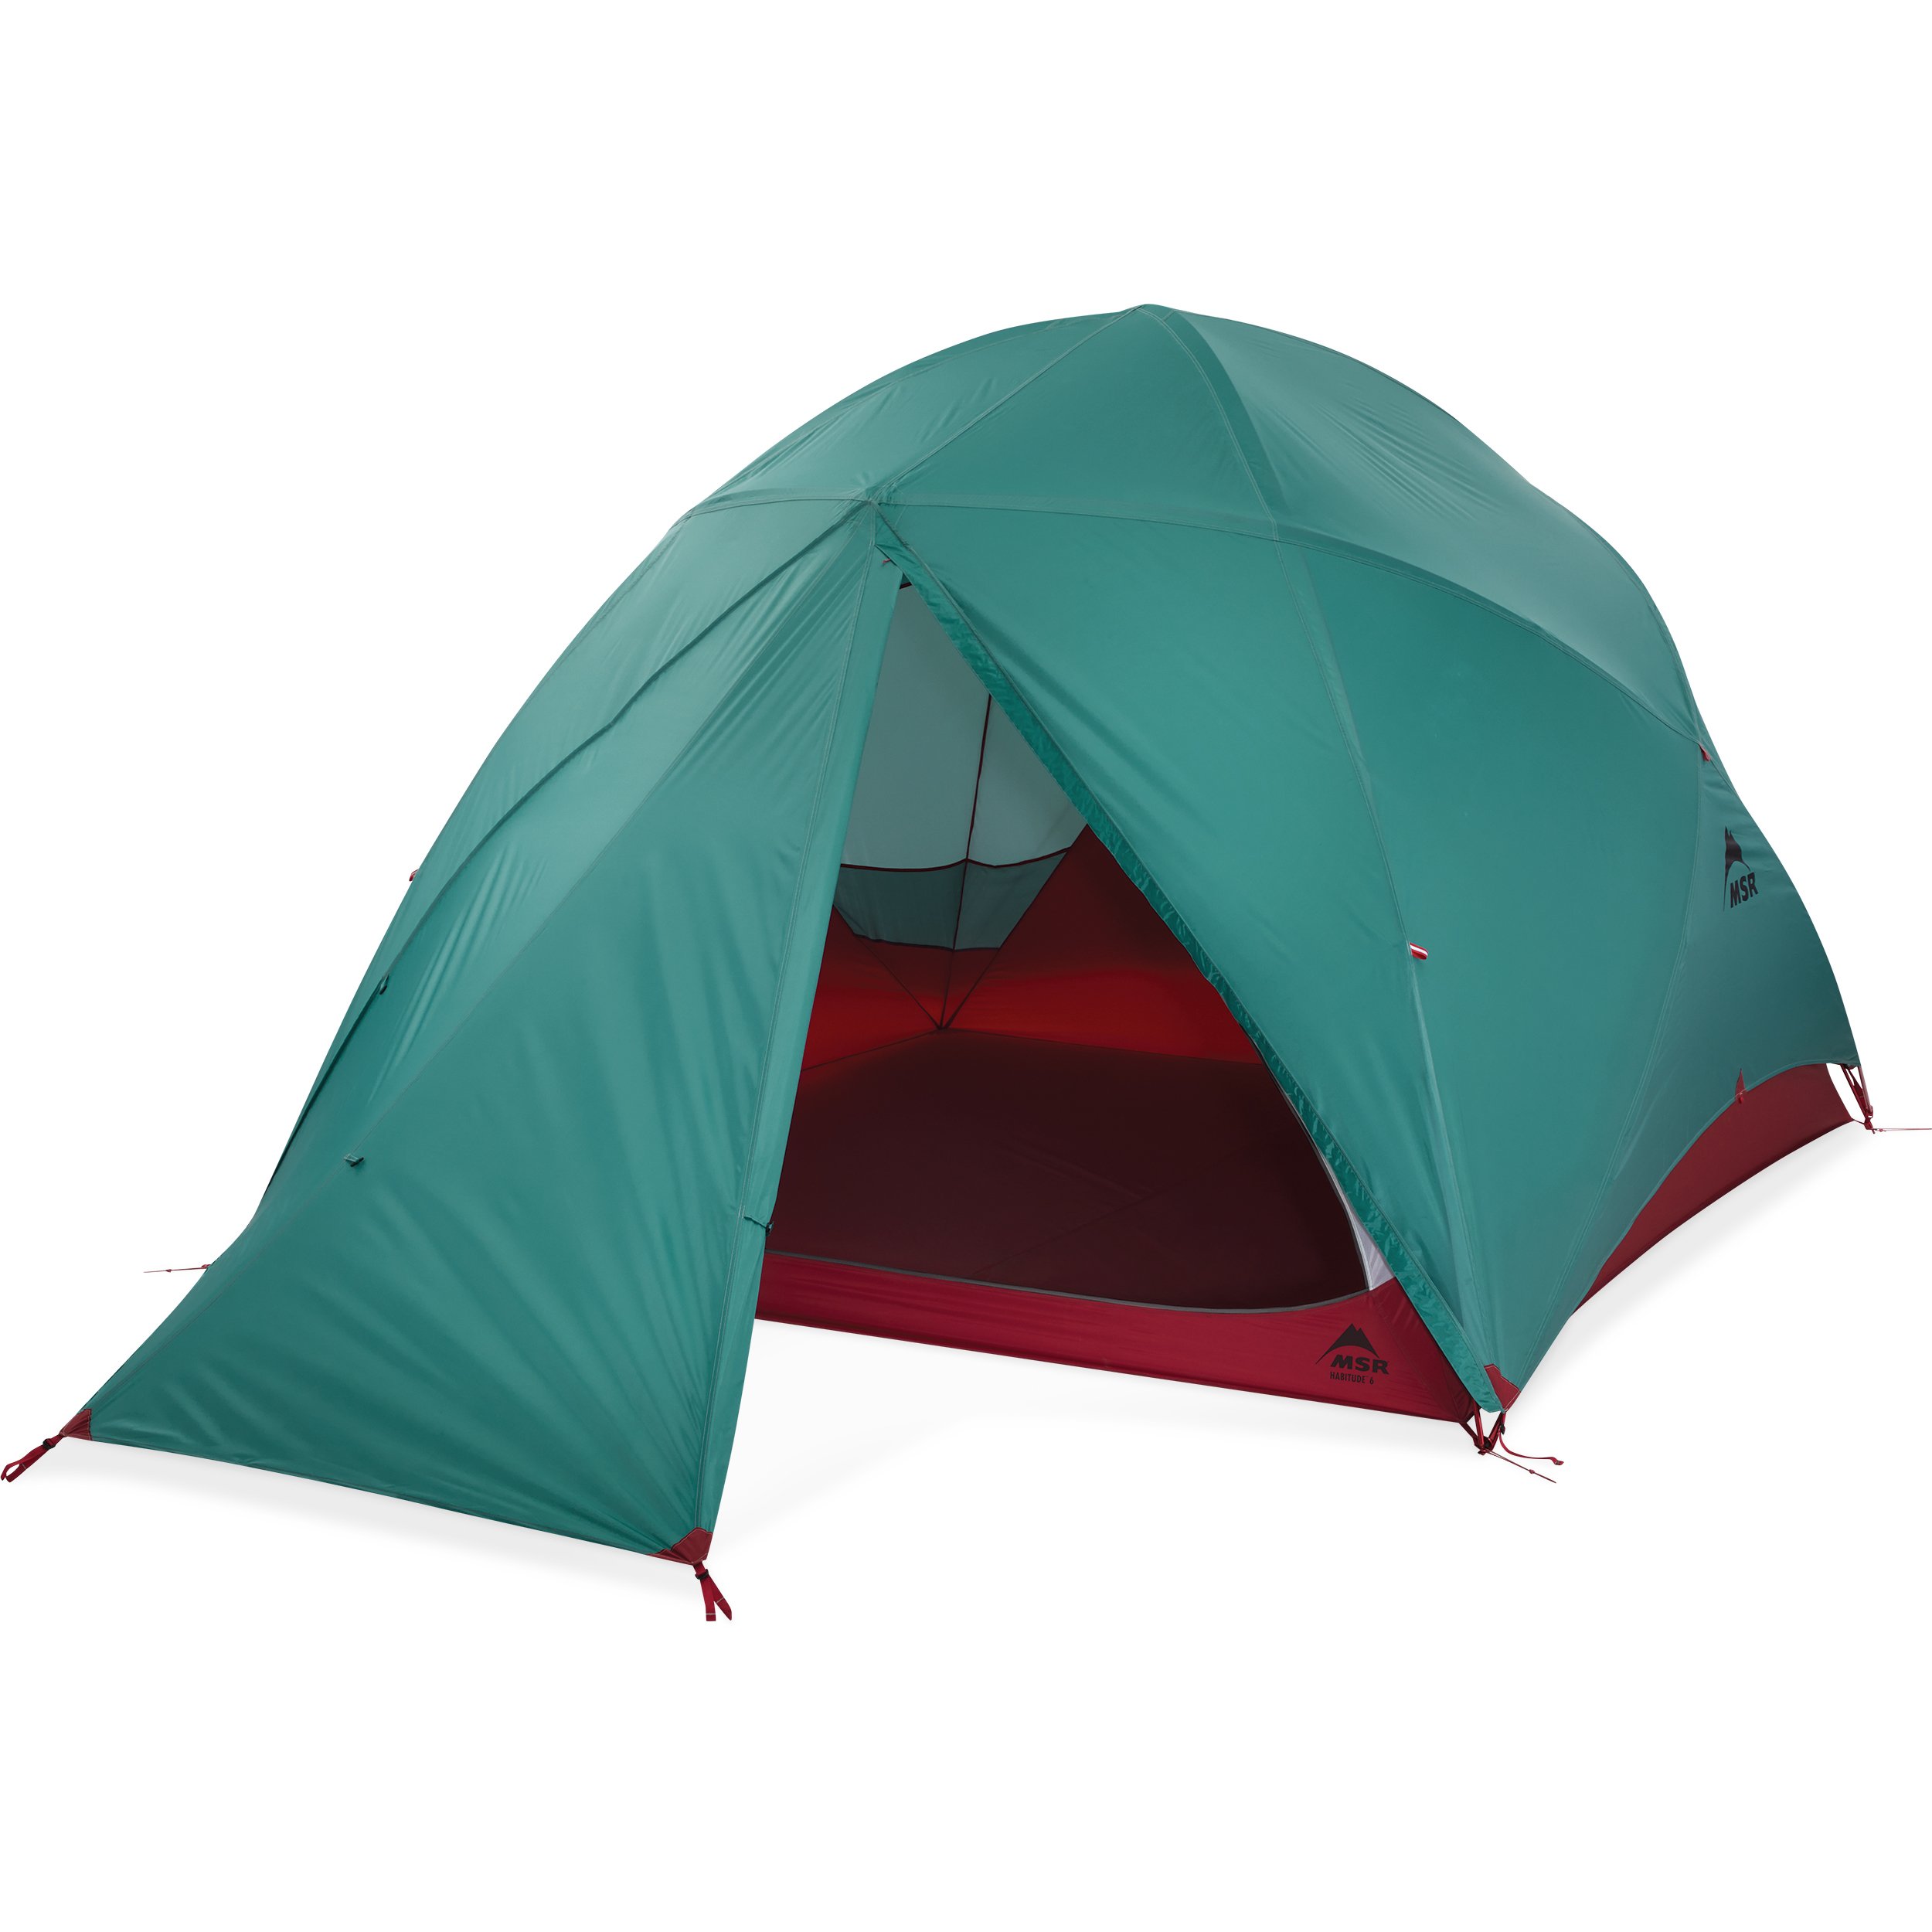 Keep Your Tent Organized with Eureka! Tent Accessories